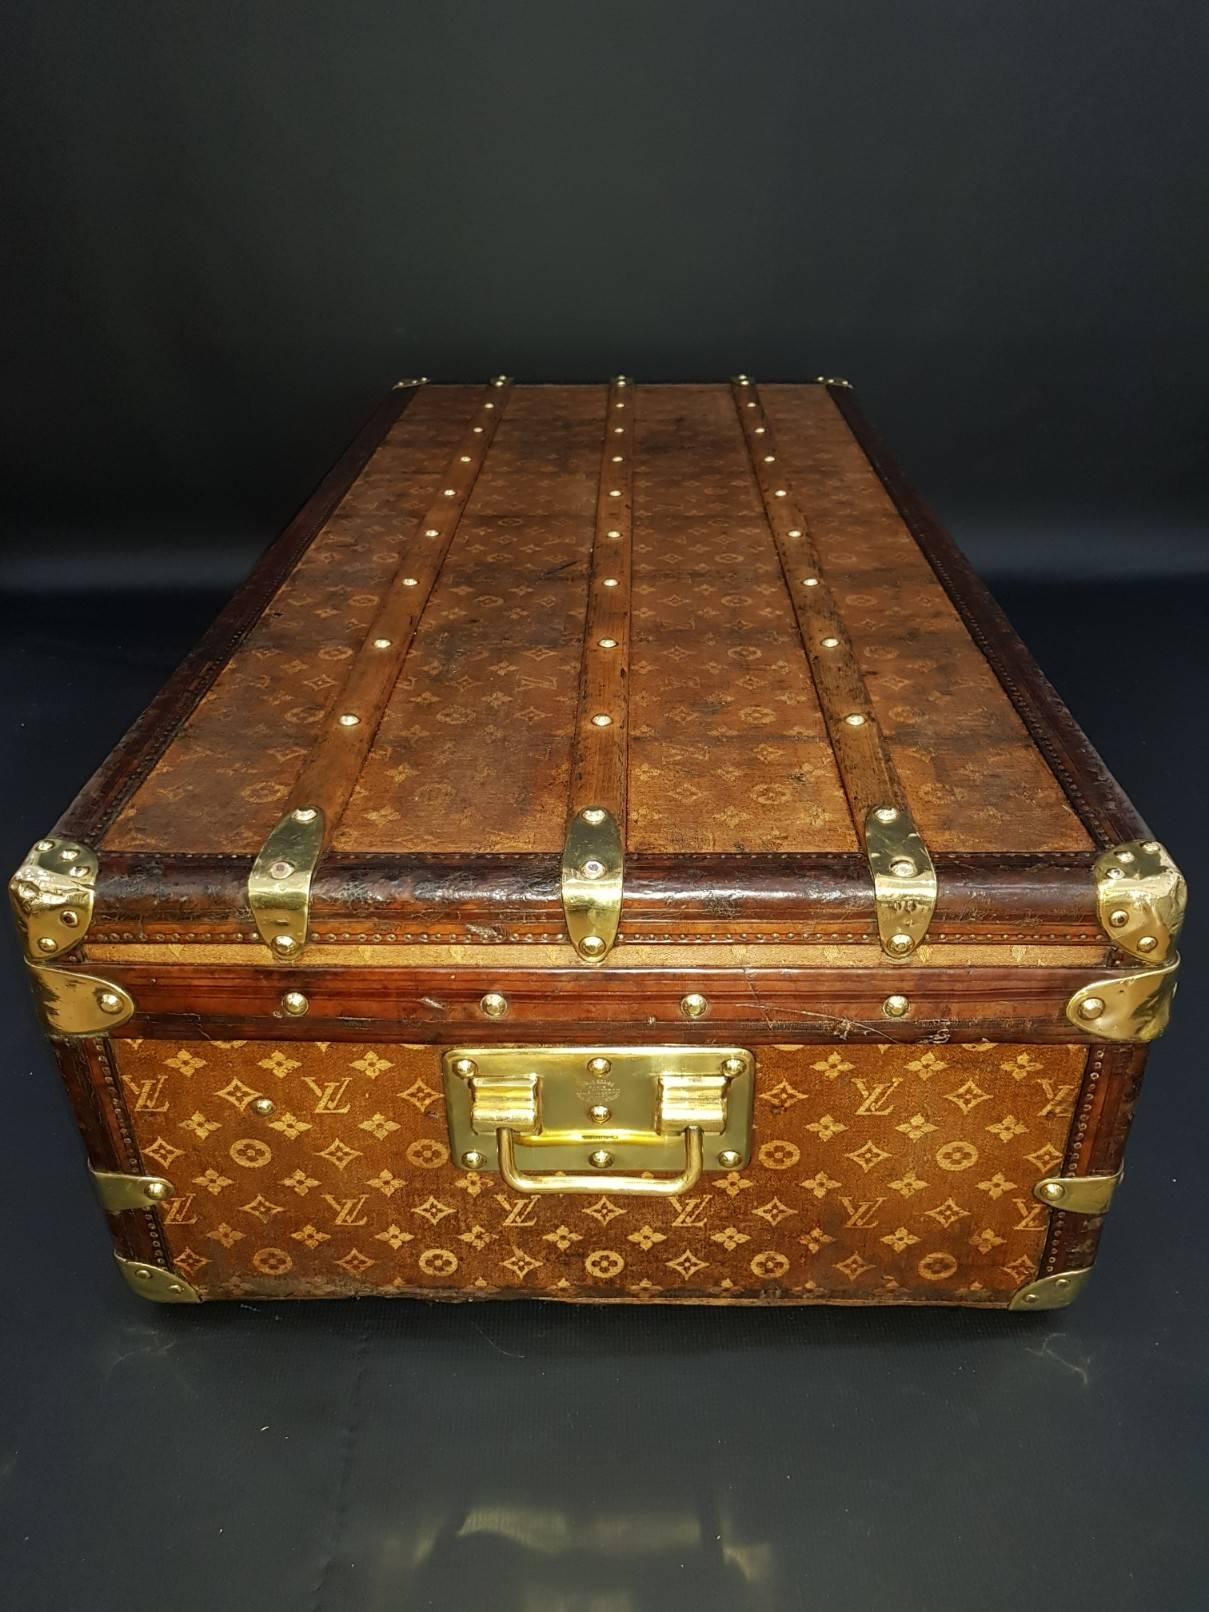 For sale an 1900s Louis Vuitton cabin trunk covered in monogram woven canvas with leather bounding and brass hardware.

In very good condition for age as can be seen on the photos.

Dimensions are 110cm x 55cm x 32cm.